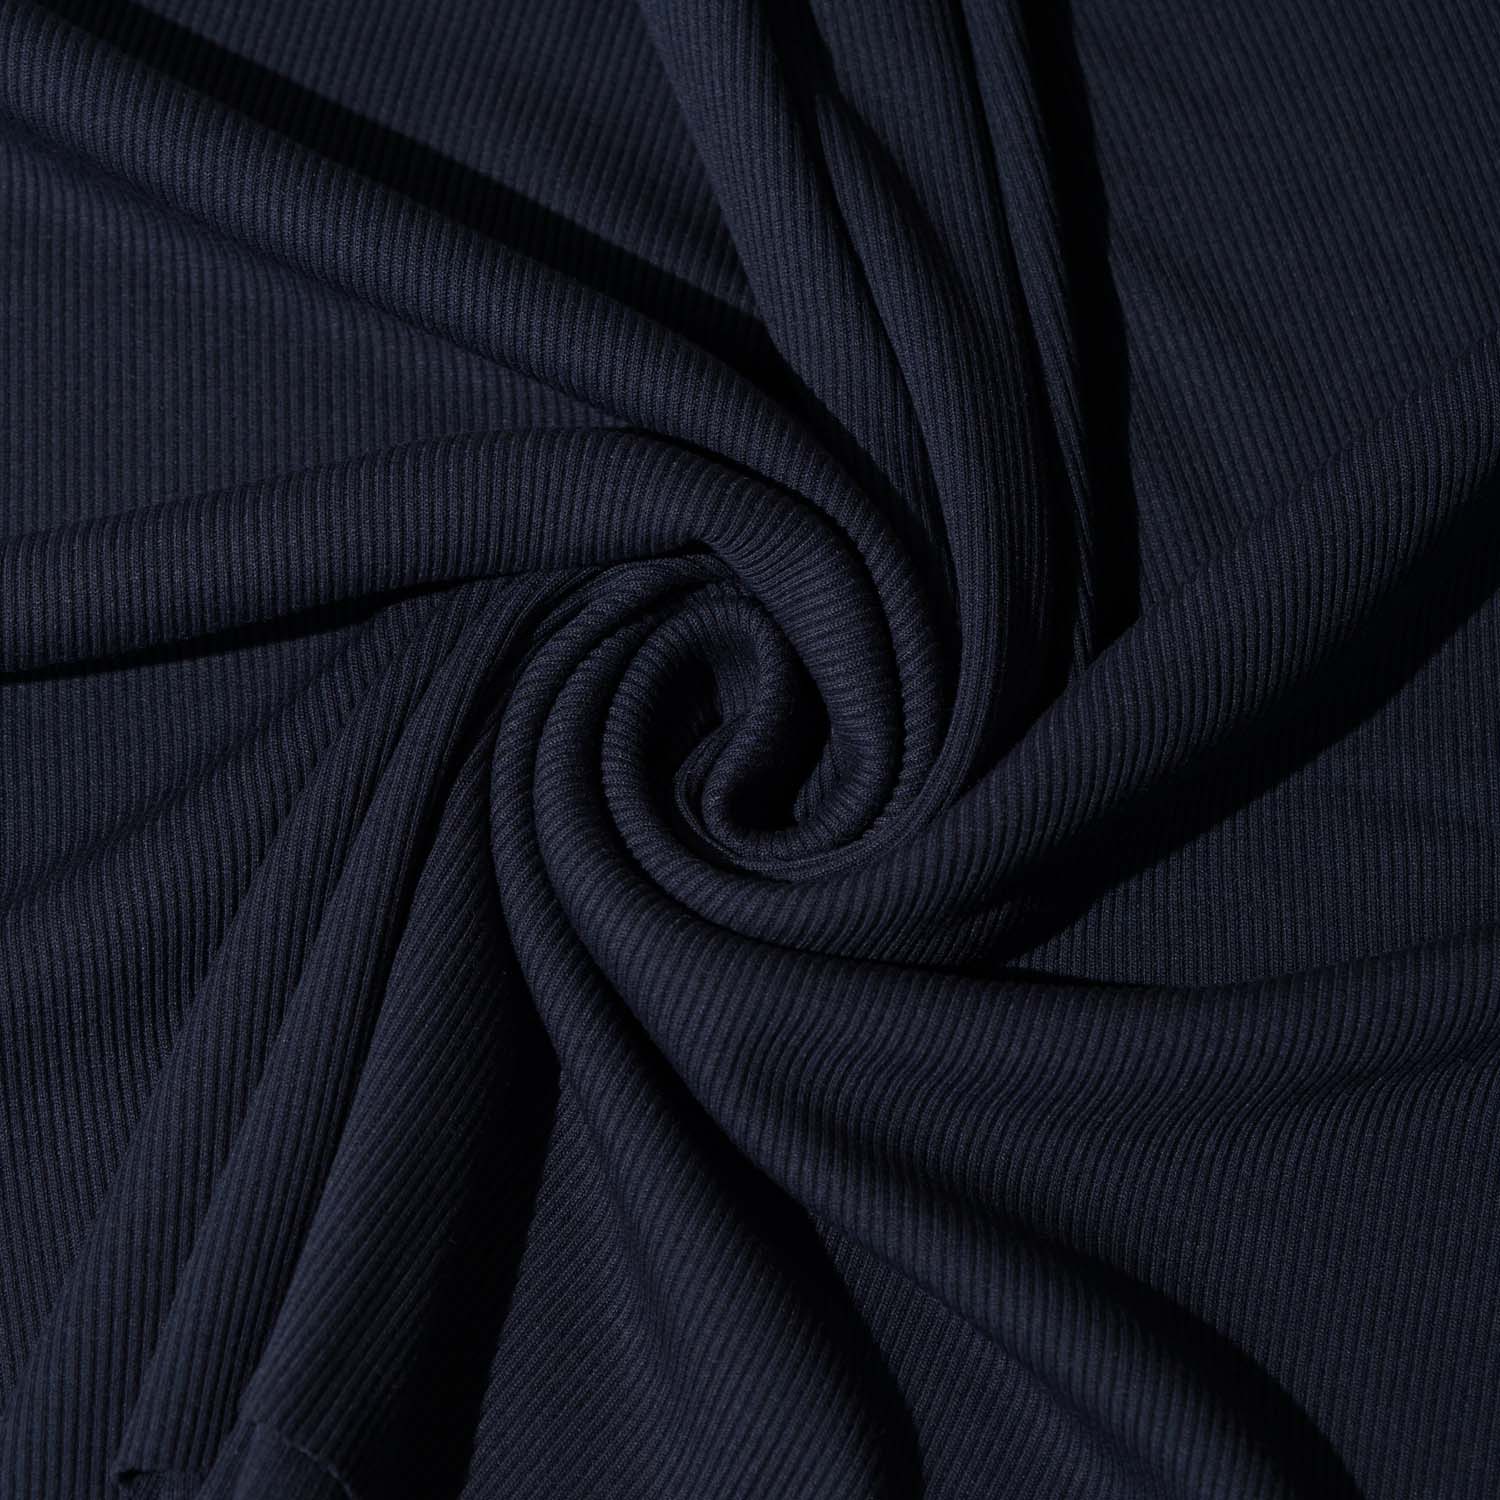 Tencel Fabric: Let's Find Out Its Specialties - Paramatex